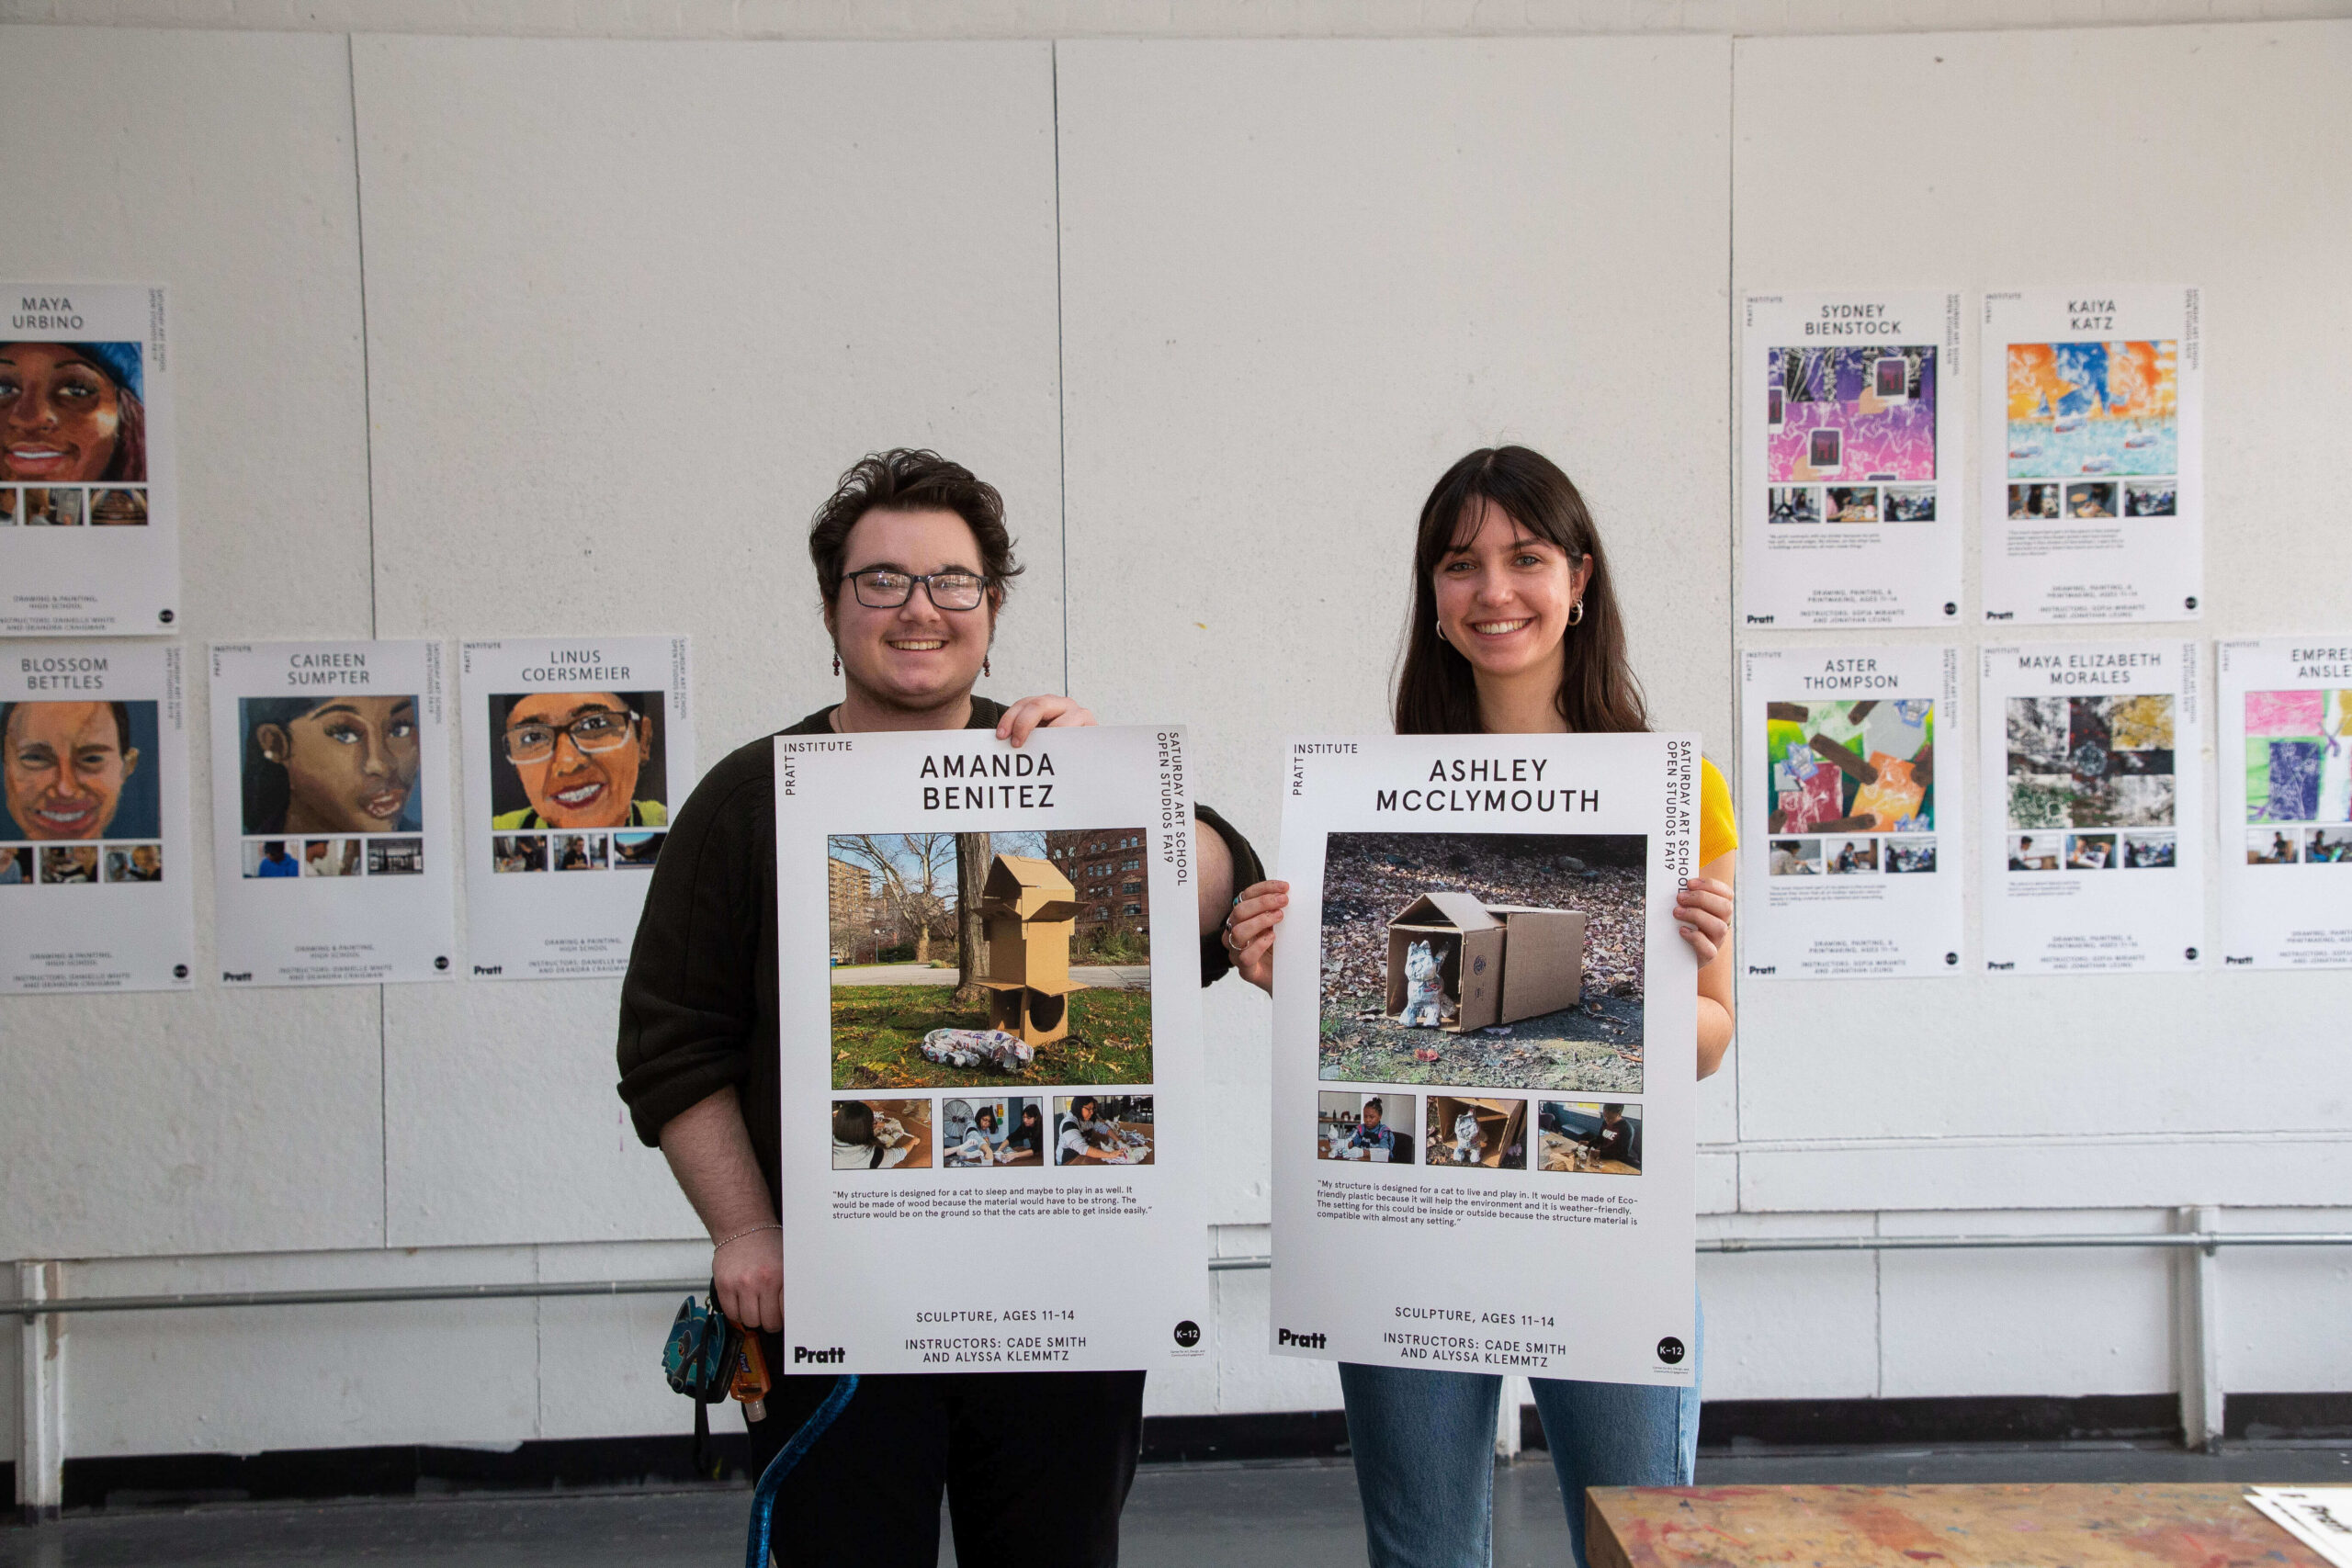 Two students present their work. They are standing with large posters at the front of a classroom. The posters contain images and text.